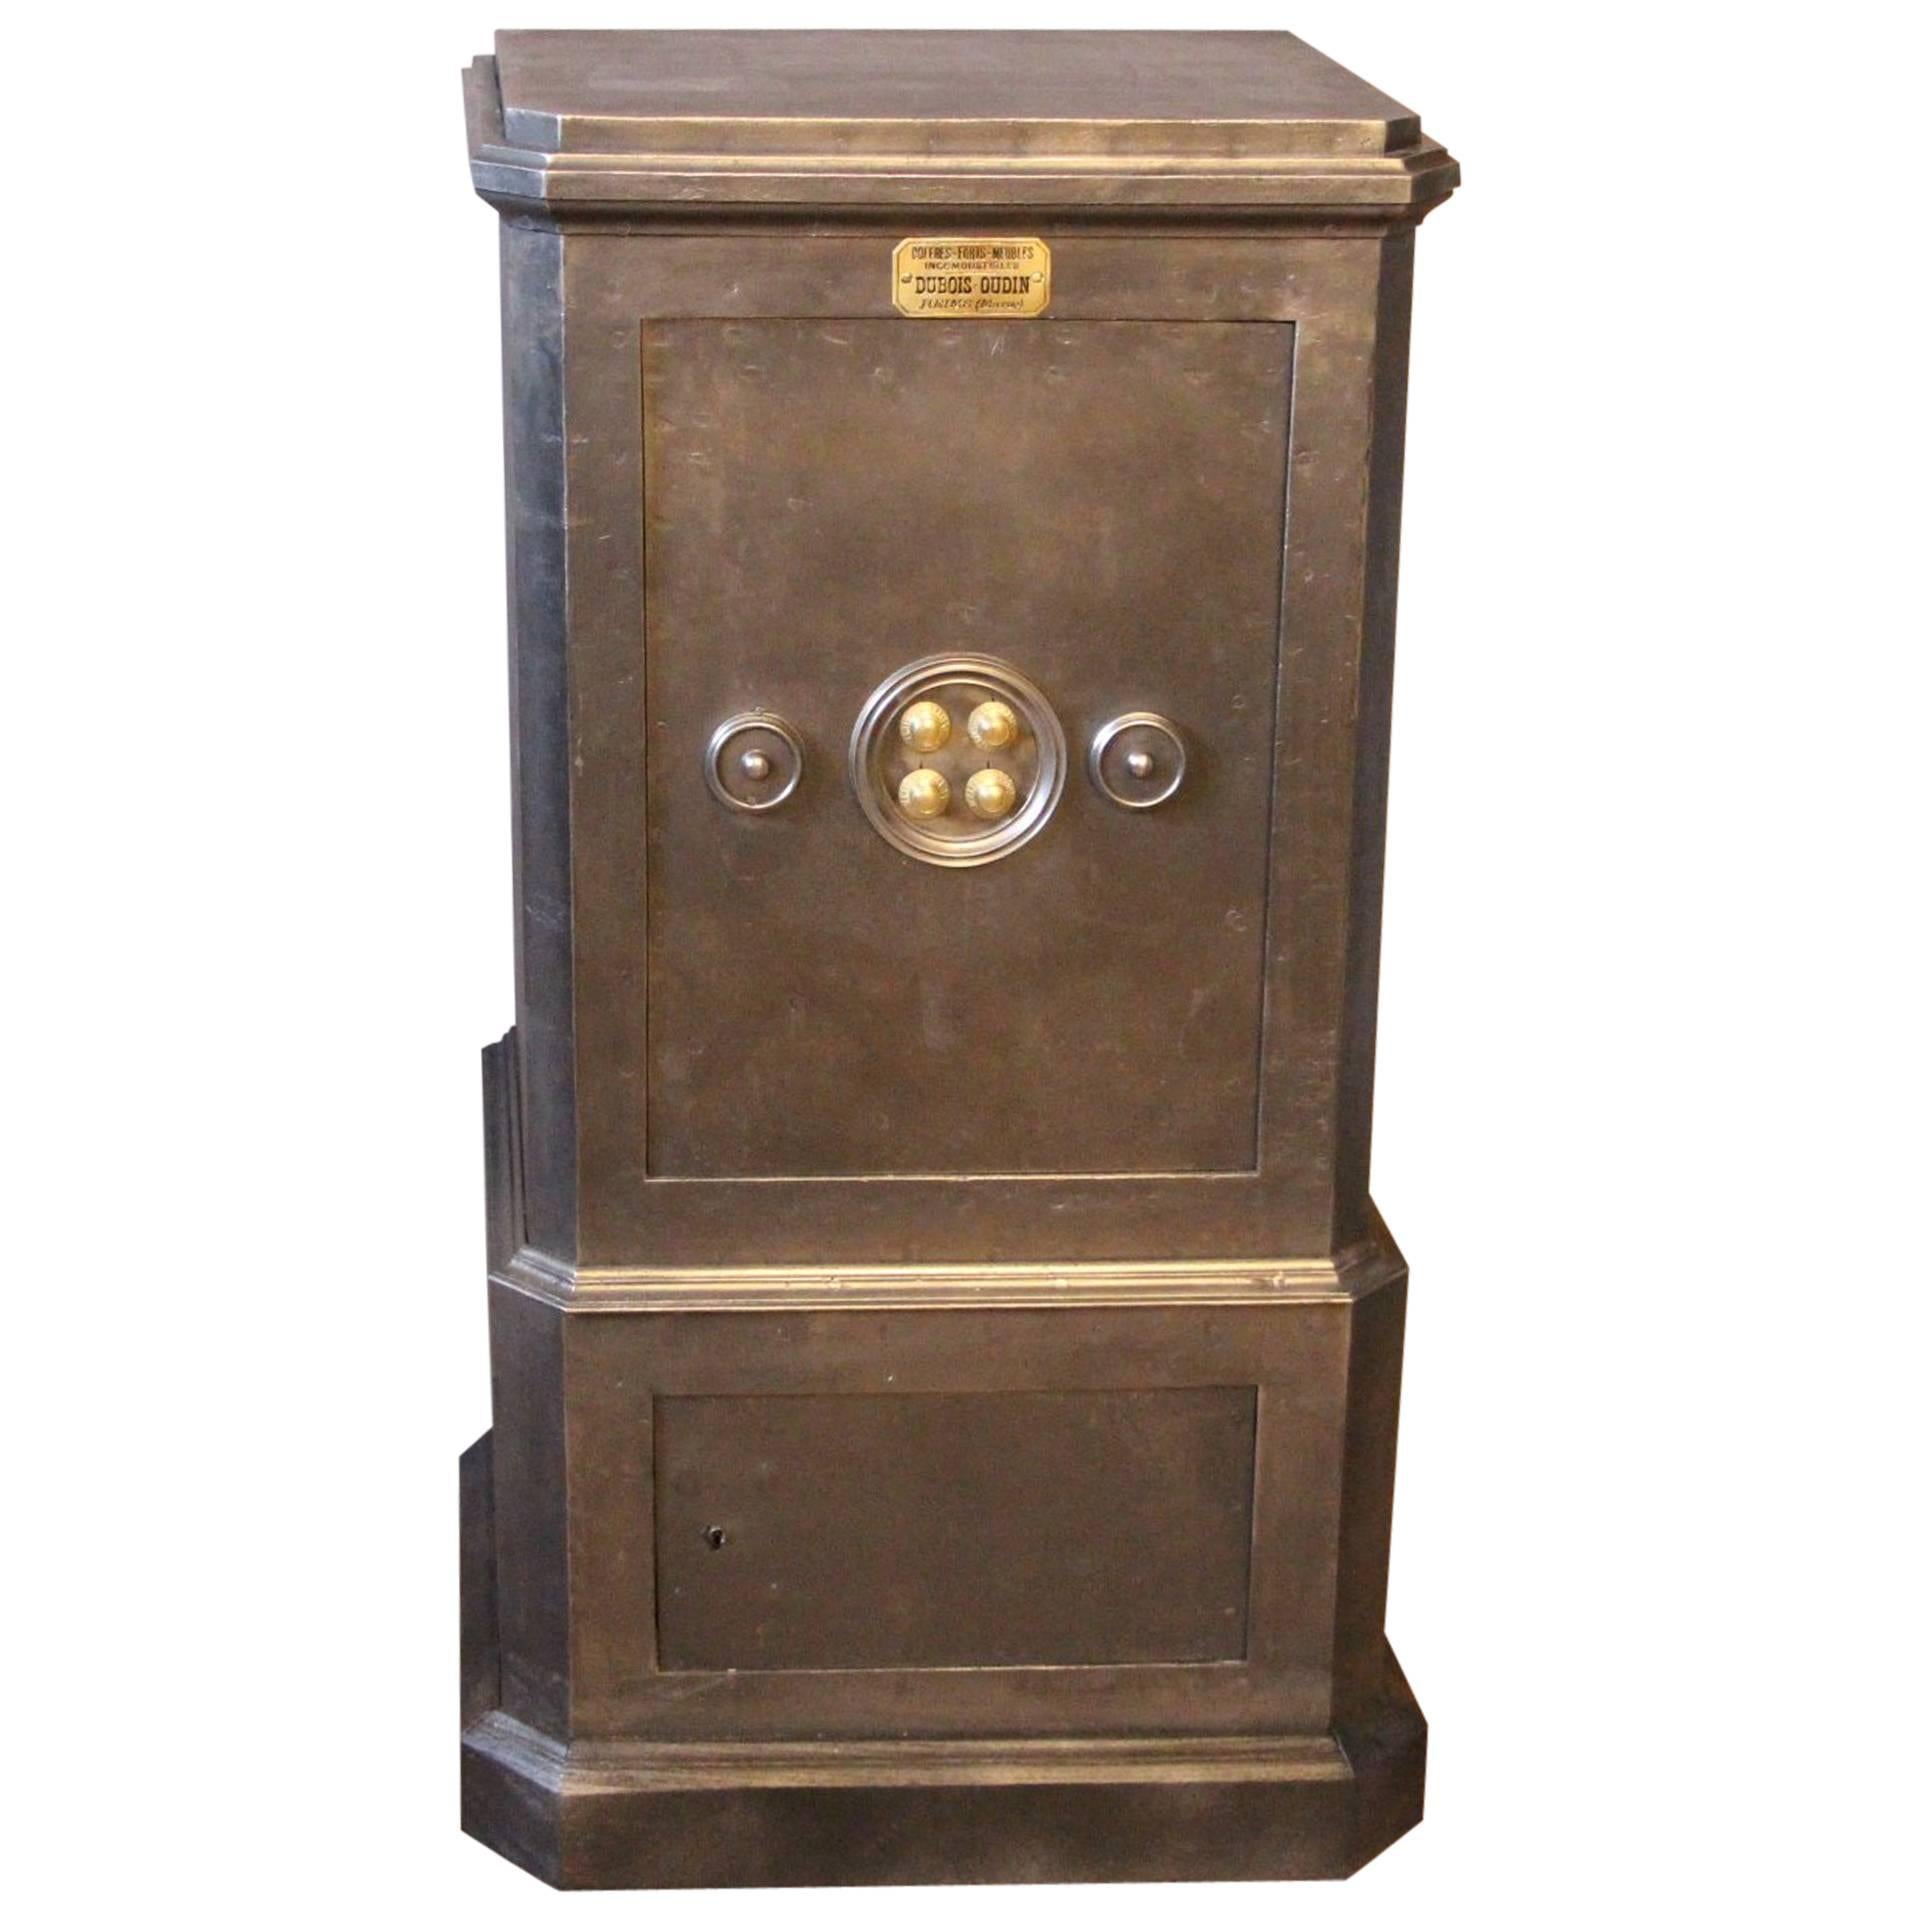 1900s Black Steel and Iron Safe with All Keys and Working Combination by Dubois